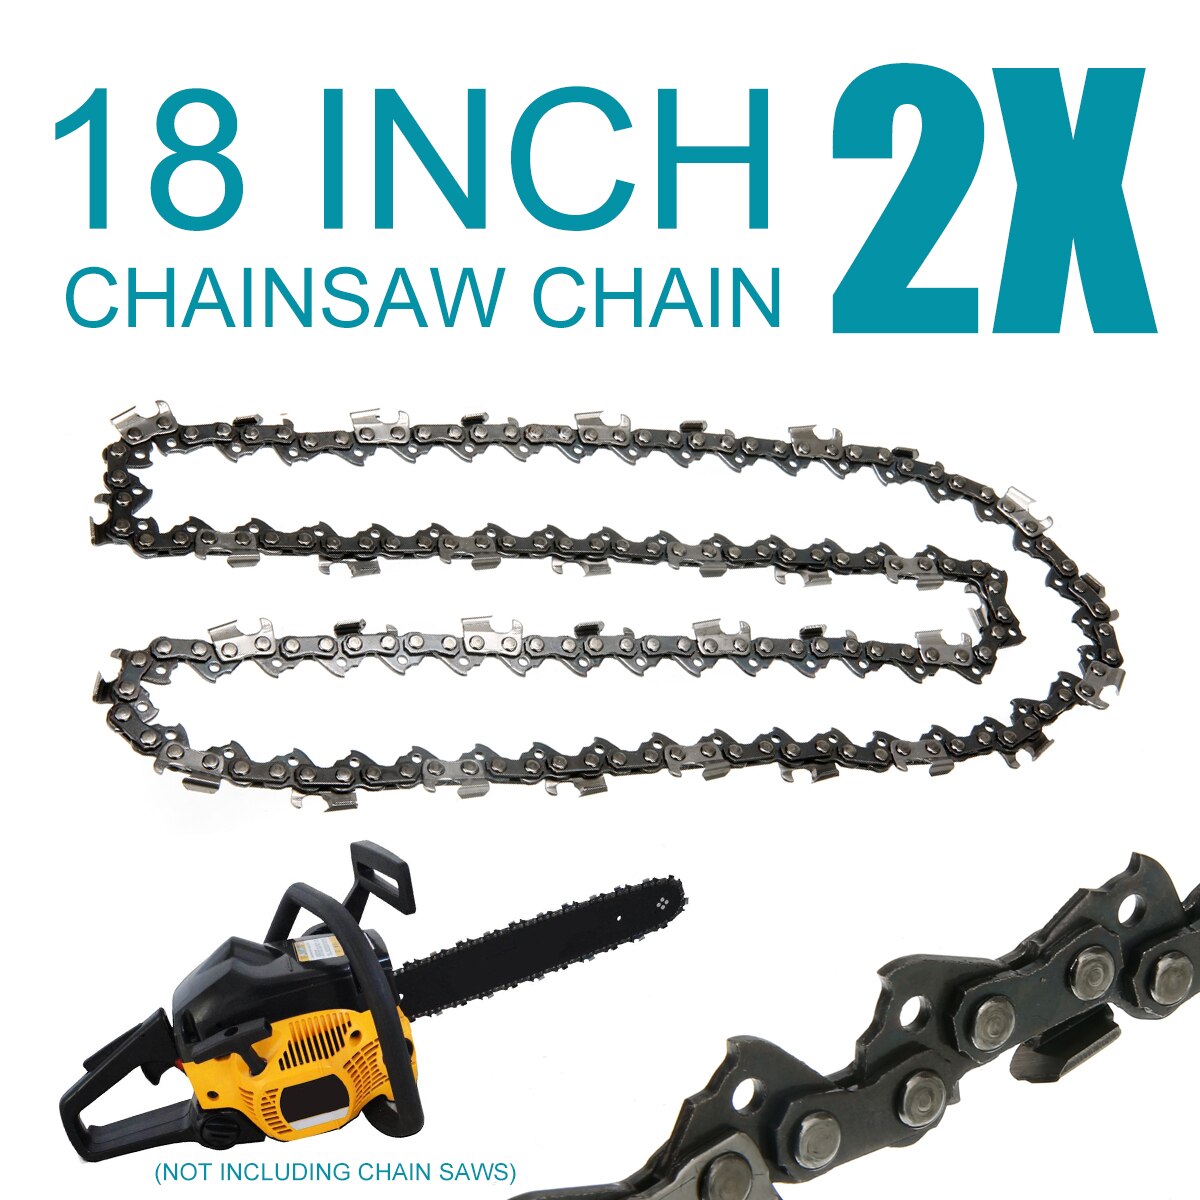 2pcs 18 inch Chainsaw Saw Chain Blade Pitch .325 " 0.058 Gauge 72DL Replacement Chains Hardware Tools